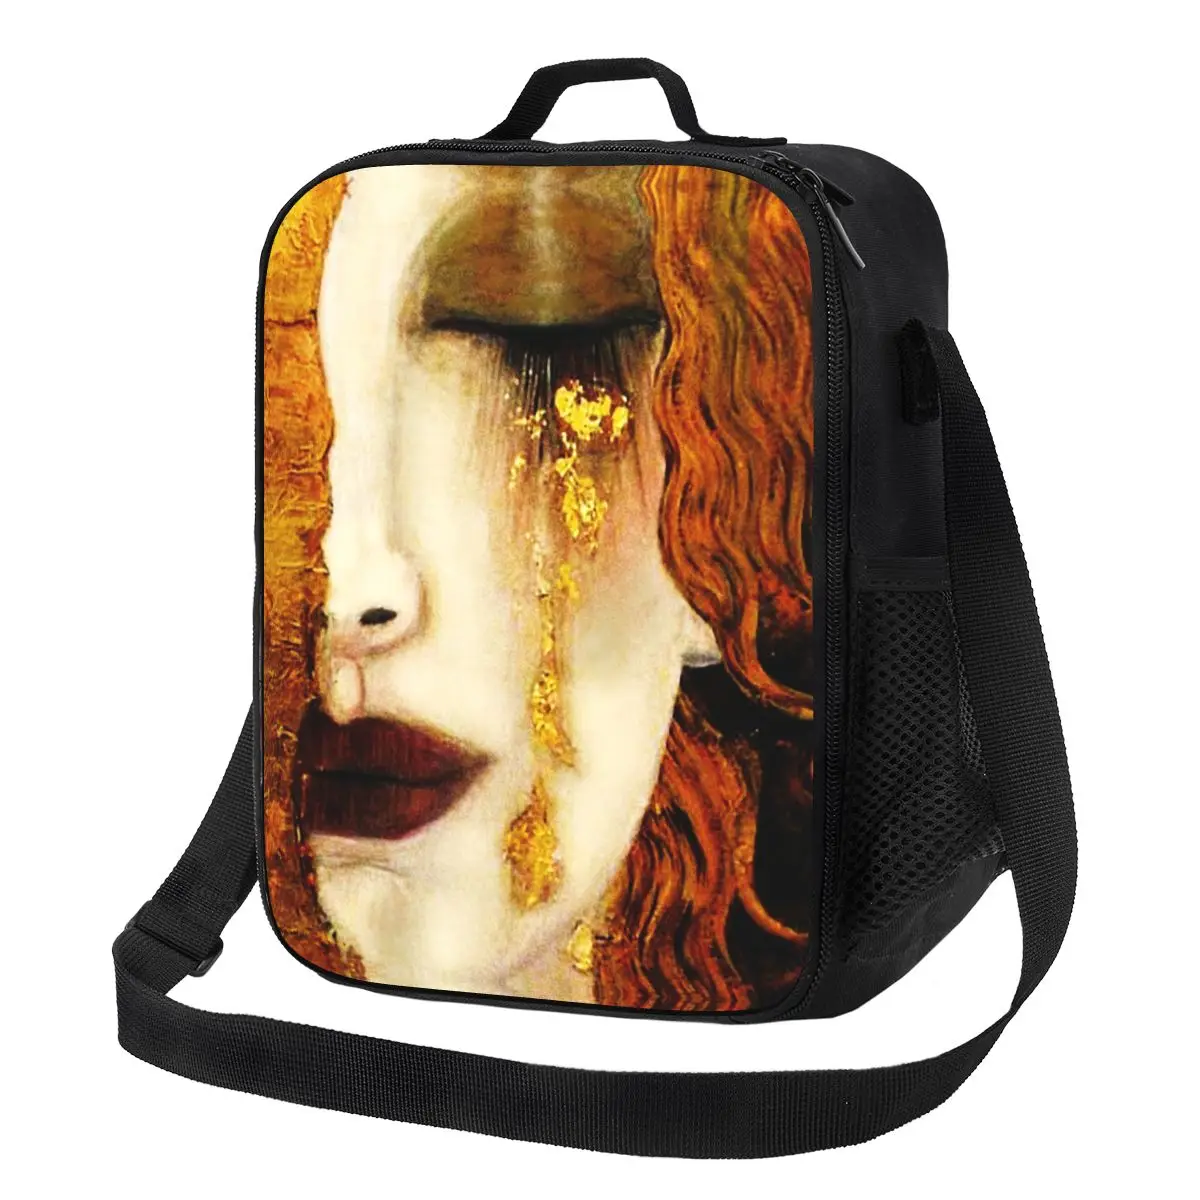 

Gustav Klimt Golden Tears Portable Lunch Boxes Waterproof Symbolism Art Cooler Thermal Food Insulated Lunch Bag Office Work